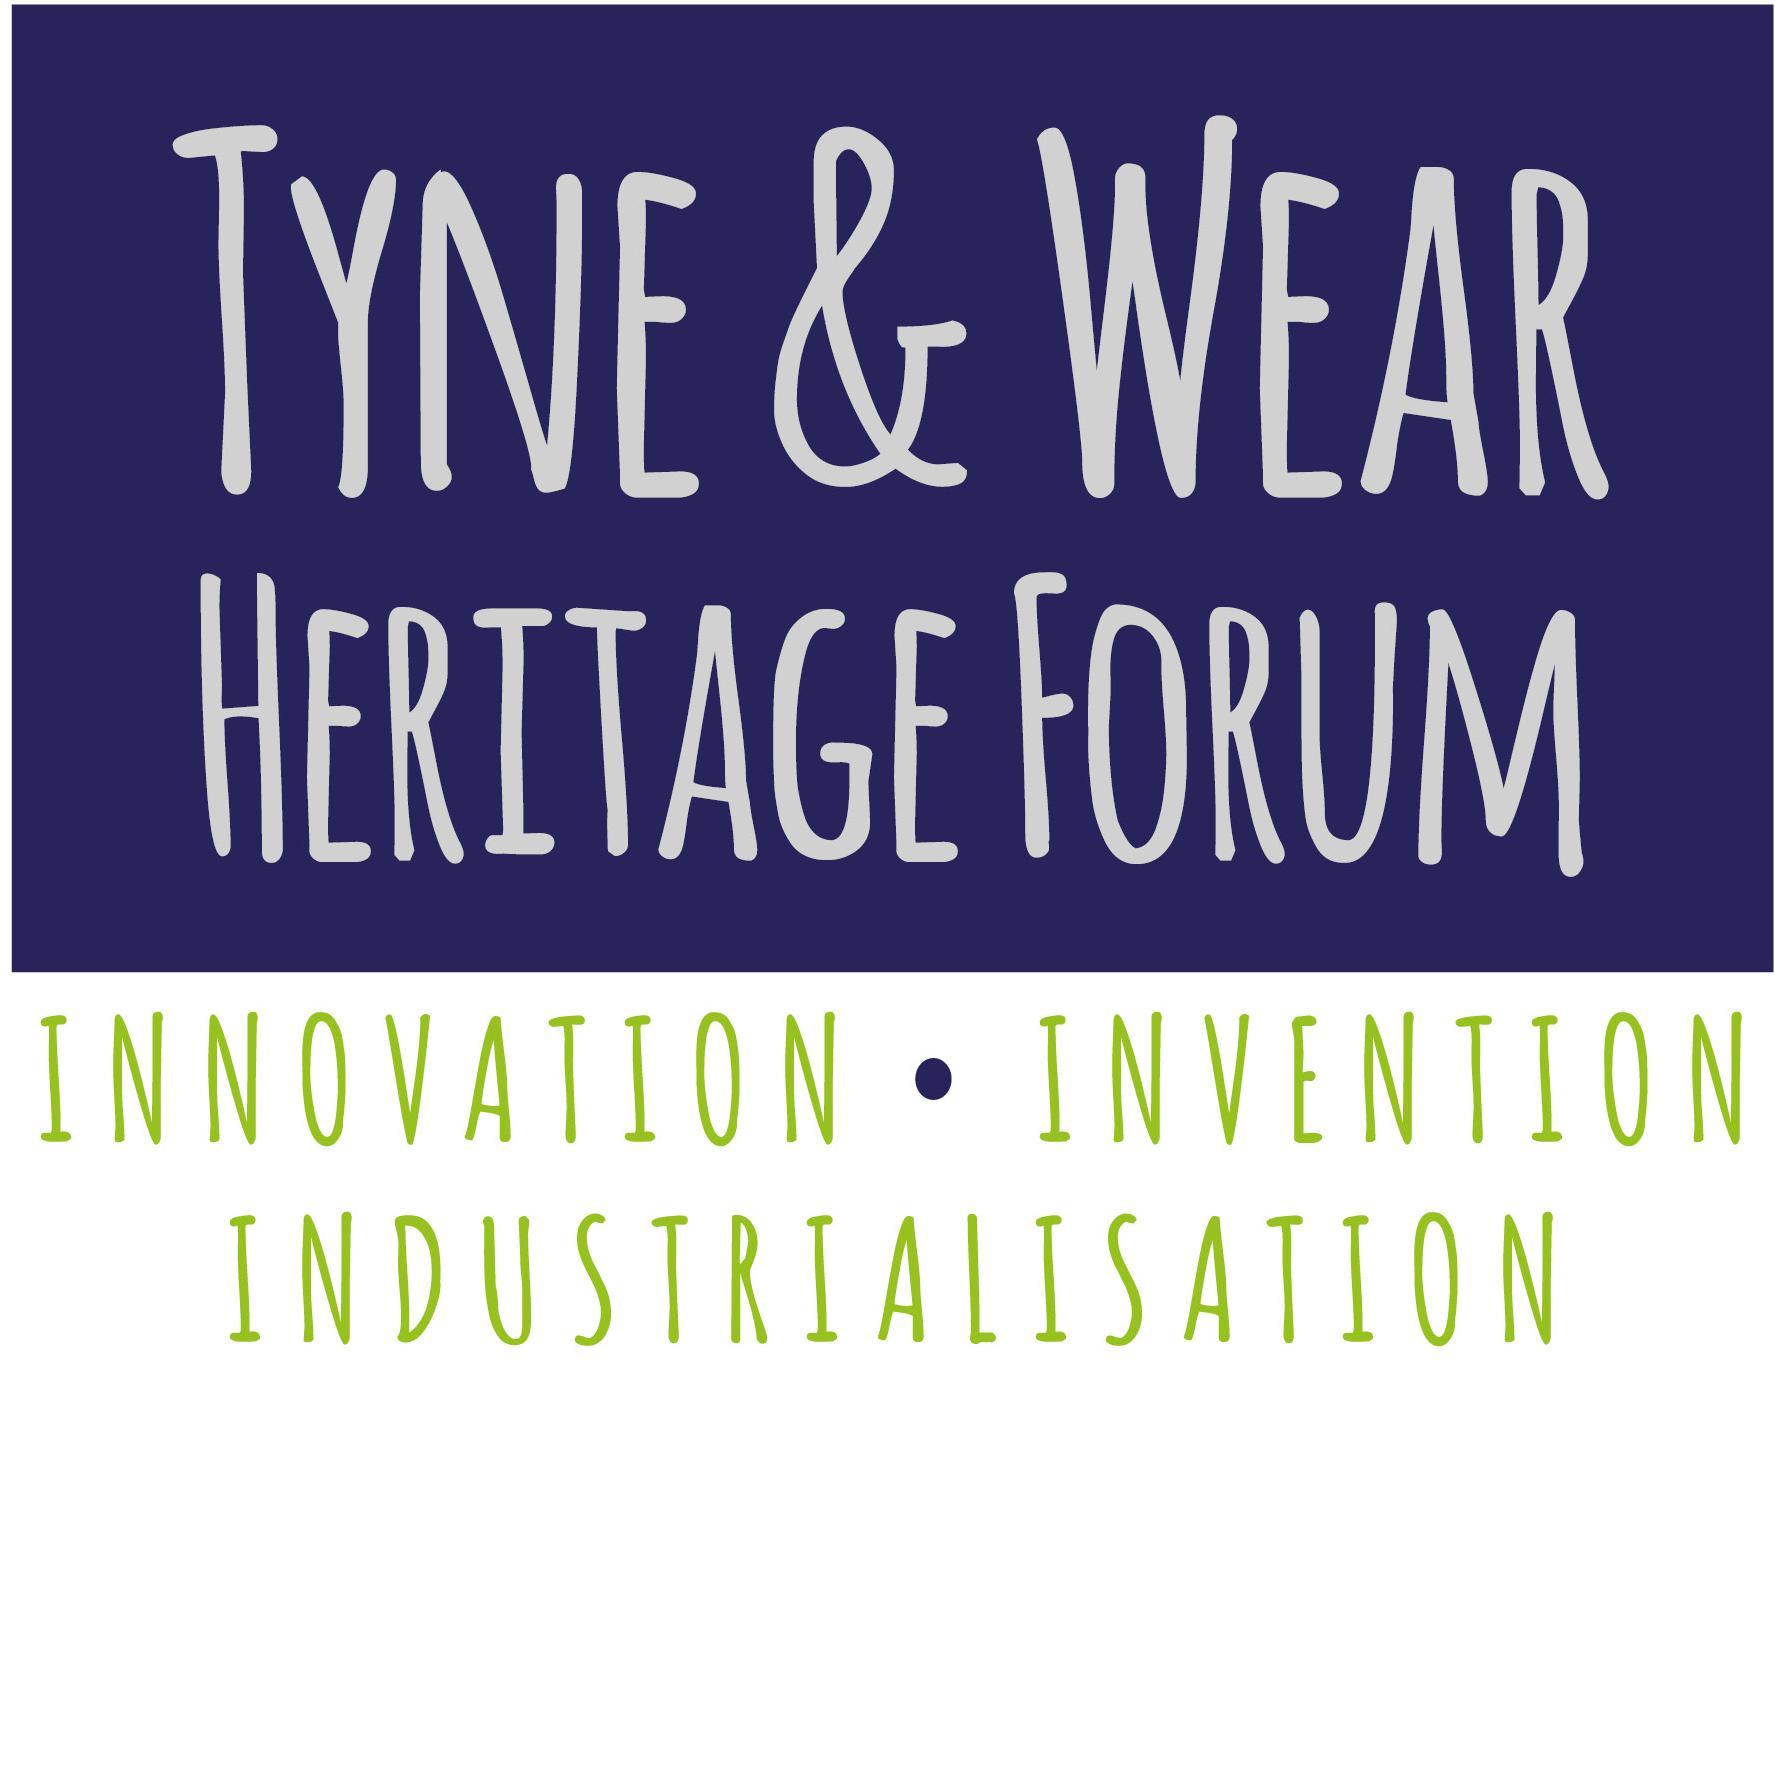 TWHF represents local heritage groups & is actively engaged in conservation work across the region. They are organisers of the T&W Heritage Conference Jan '16.